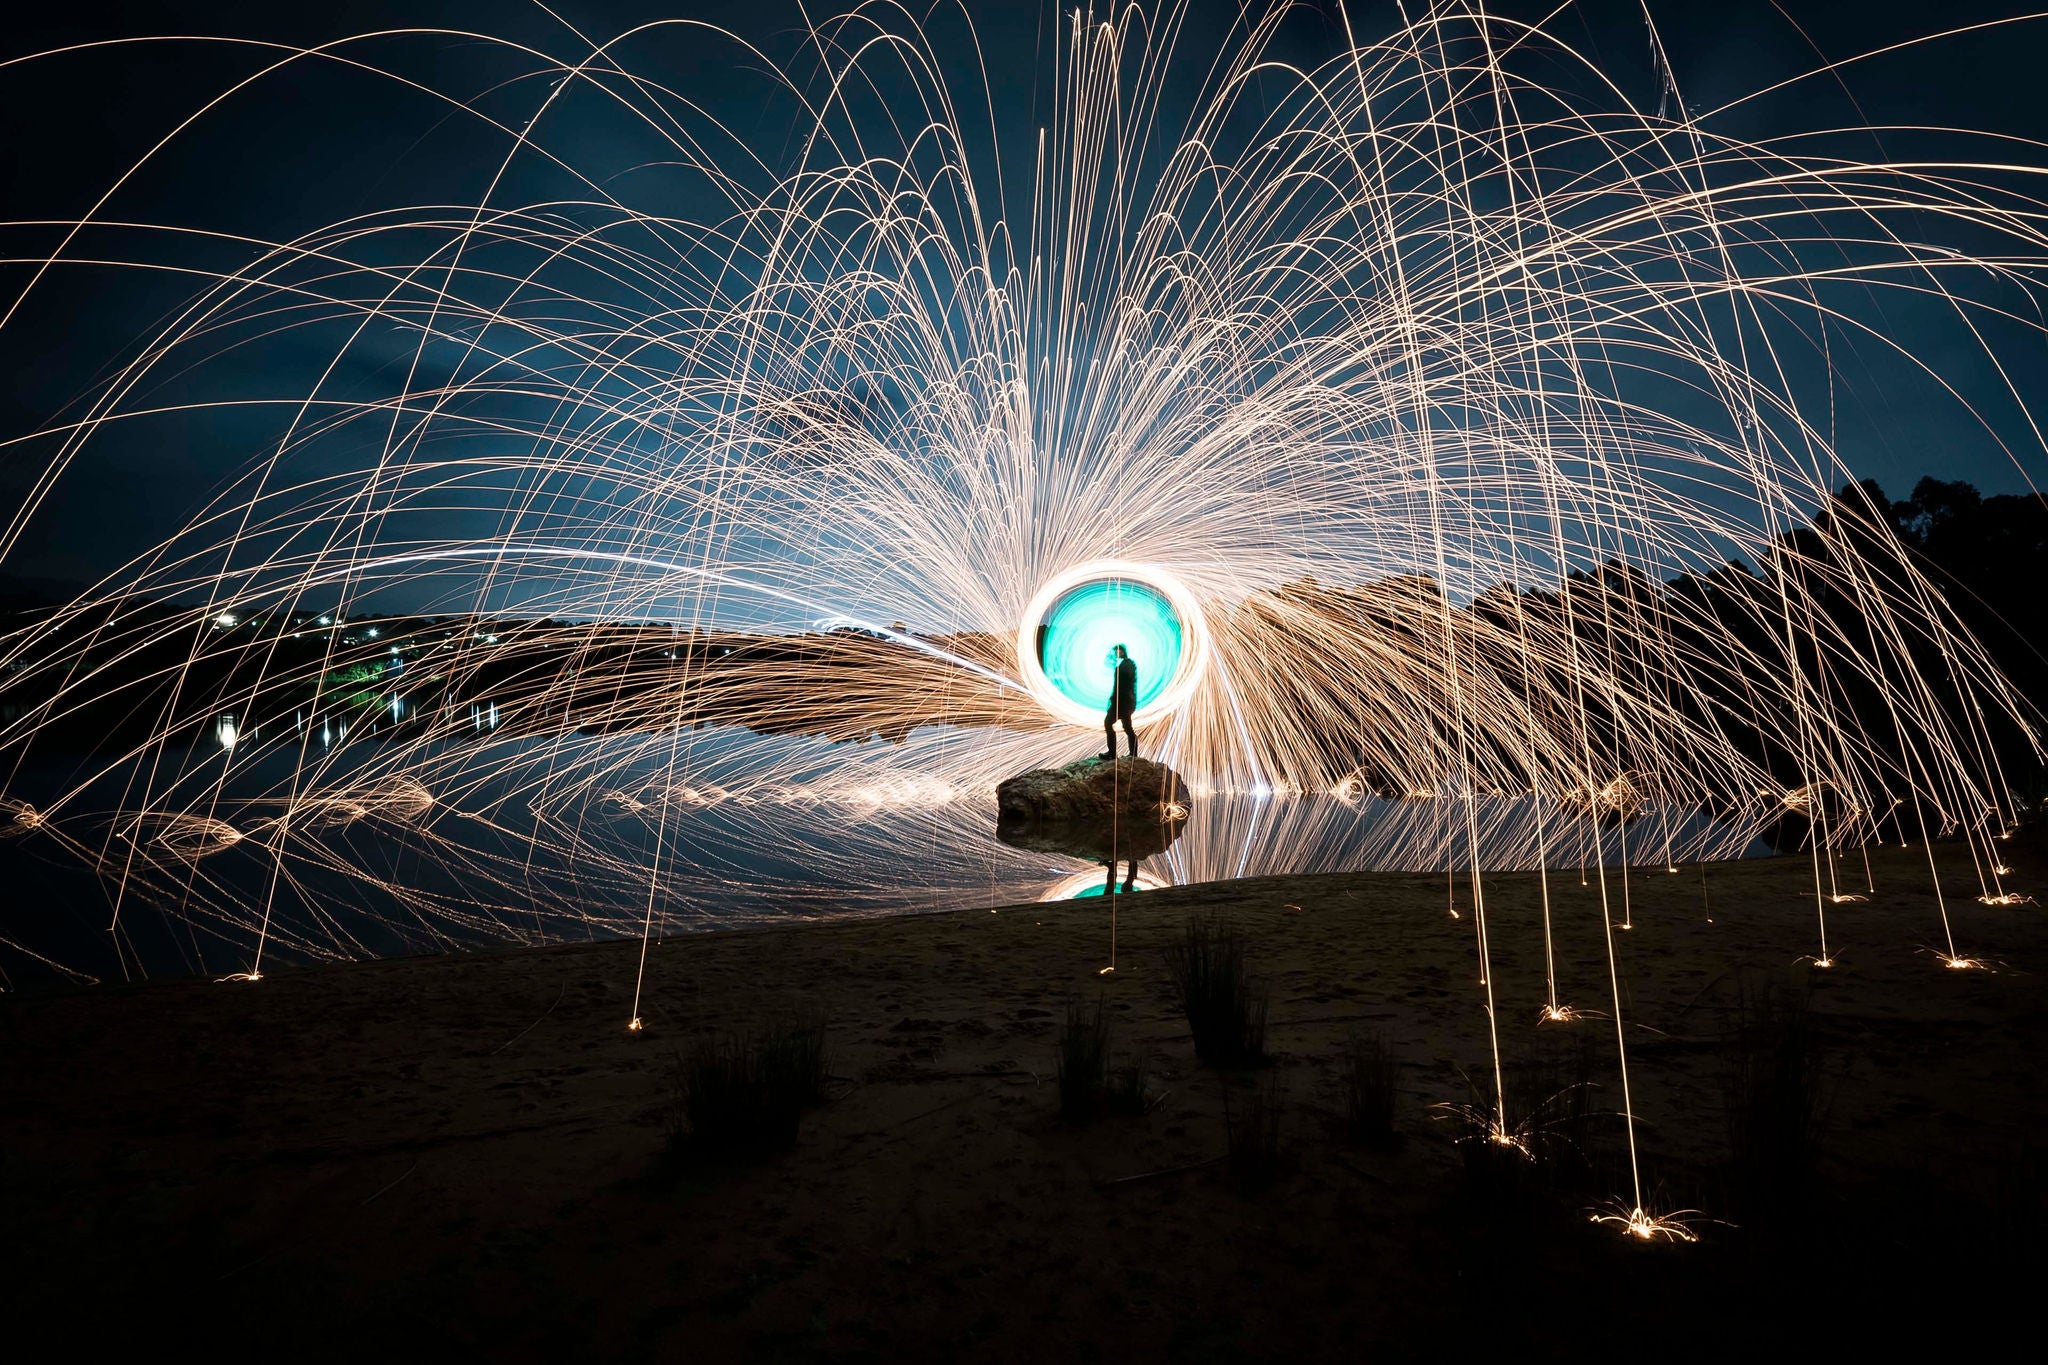 ey-silhouette-of-a-person-spinning-wire-wool-against-a-night-sky